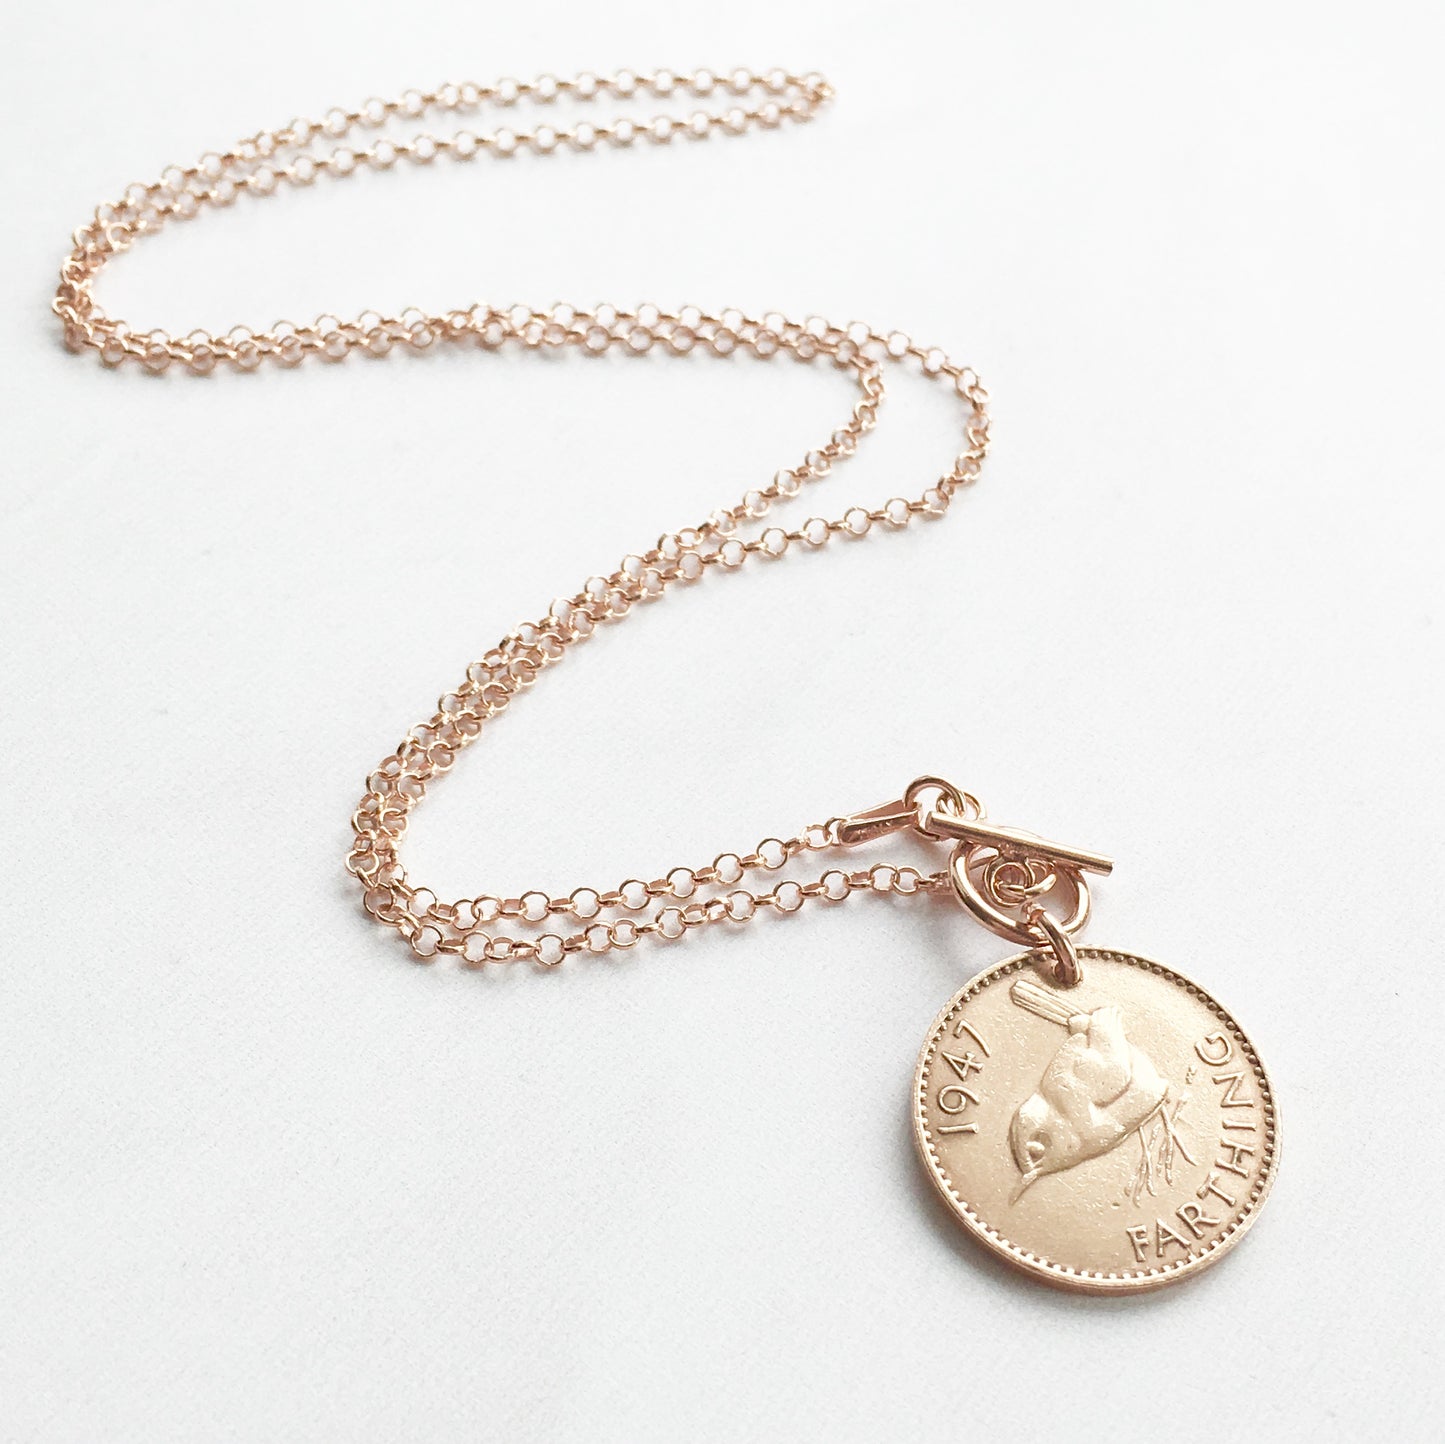 Wren Toggle Necklace - Rose Gold Necklace